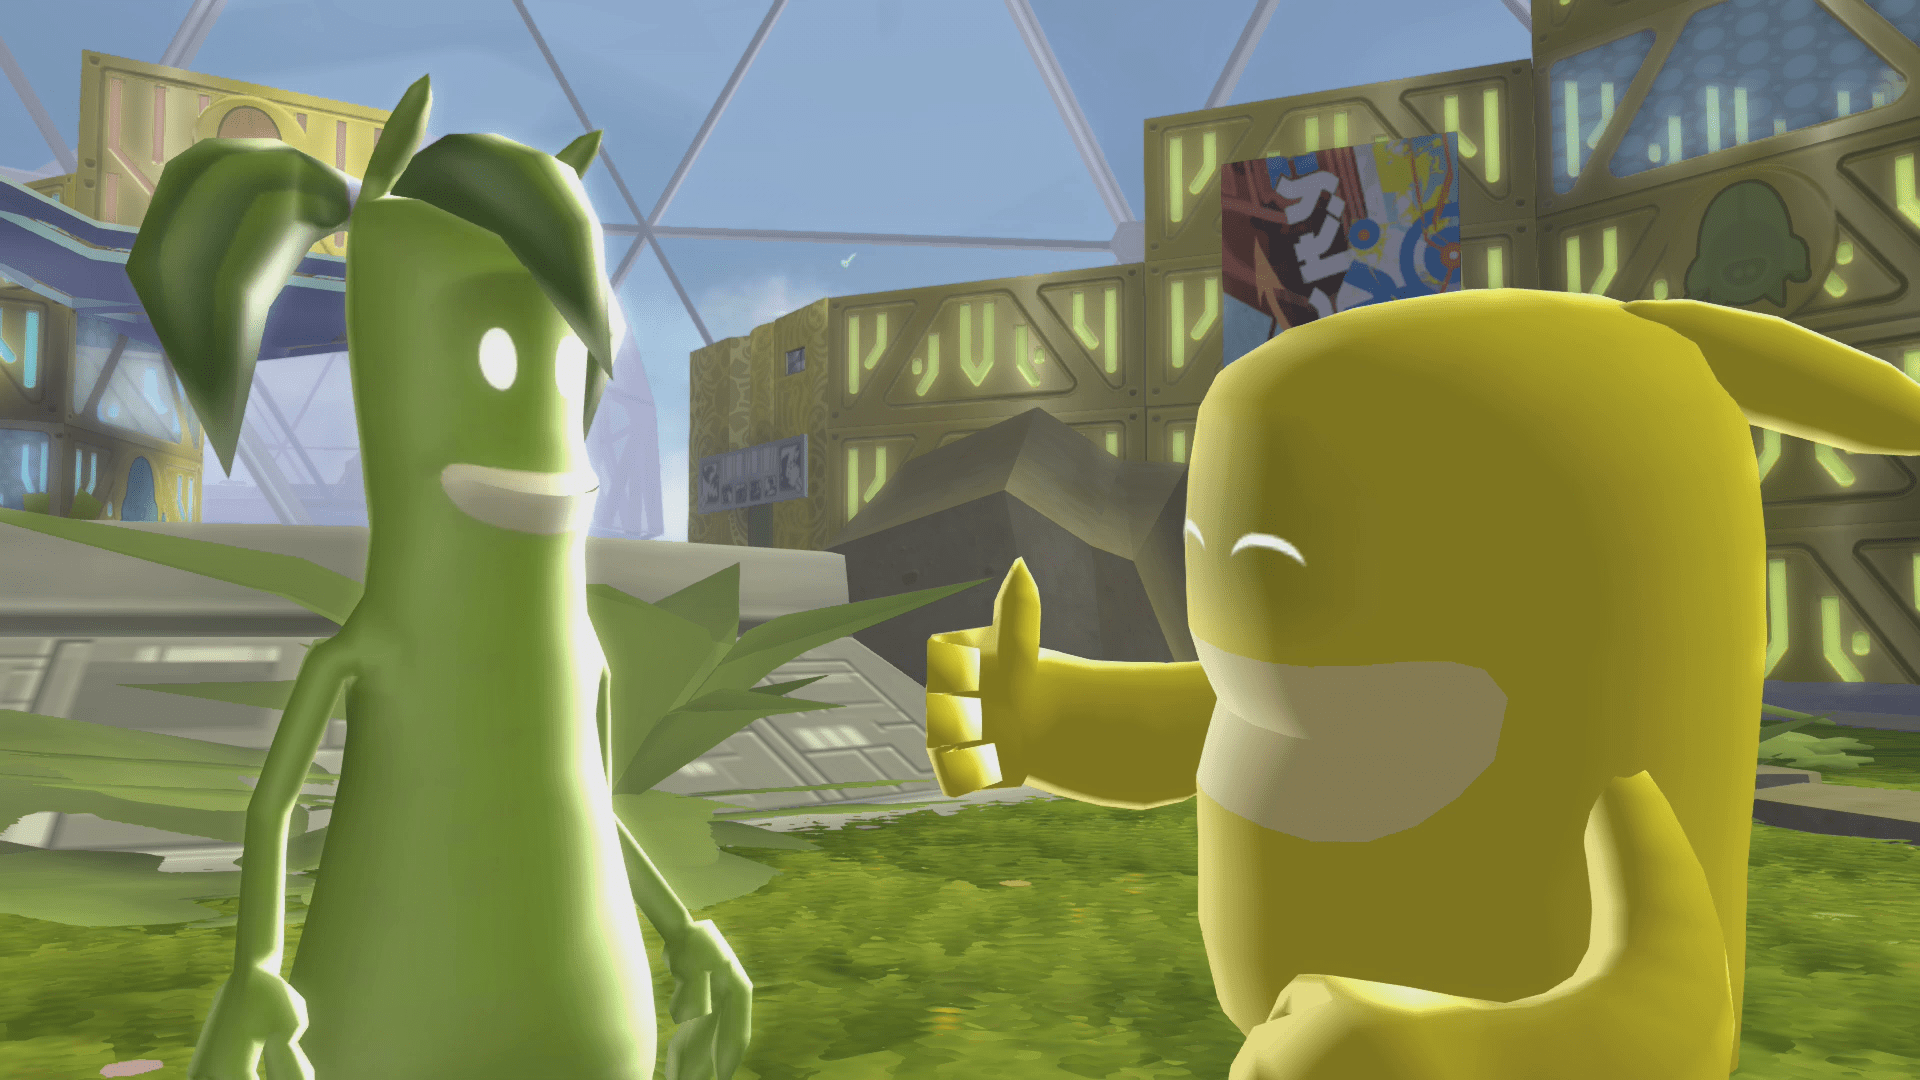 Get back on the colour revolution as de Blob 2 gets an Xbox One